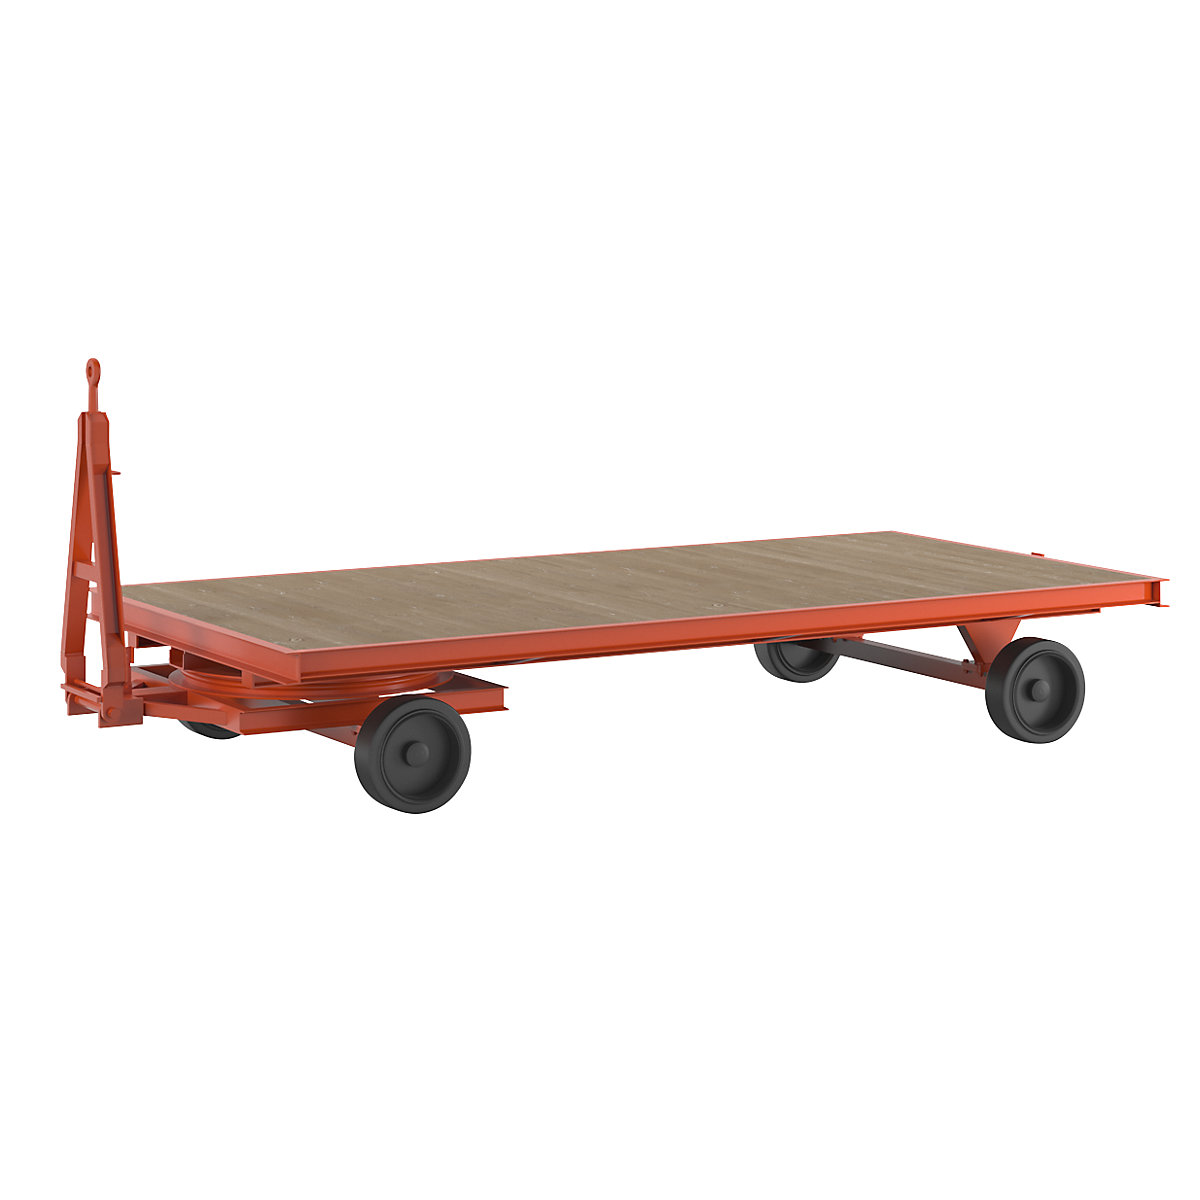 Trailer, 4-wheel double turntable steering, max. load 8 t, platform 4.0 x 2.0 m, solid rubber tyres-2